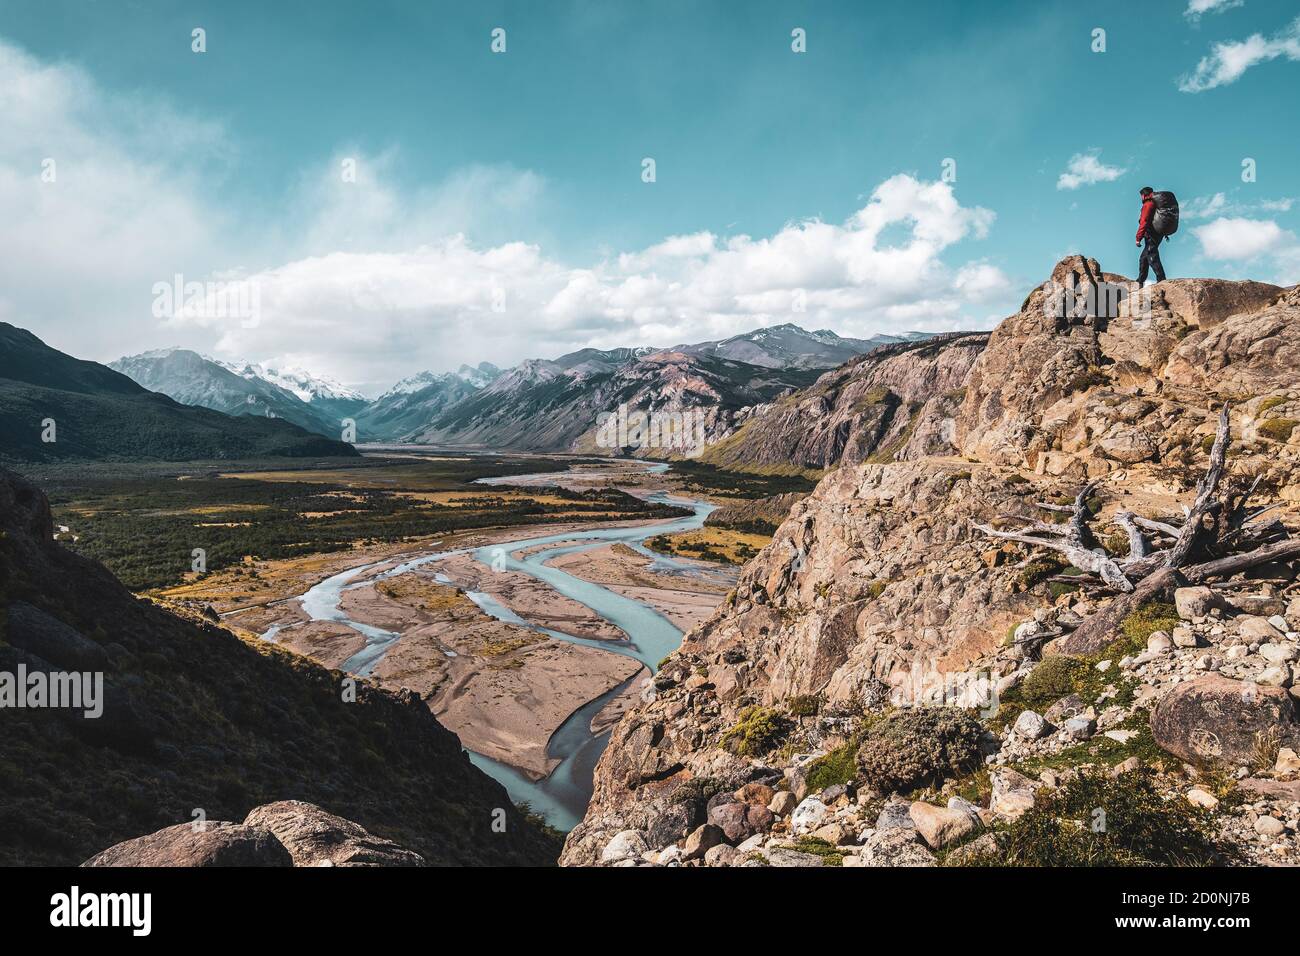 Hiker on top of a mountain admiring a valley with beautiful river in Patagonia. Stock Photo